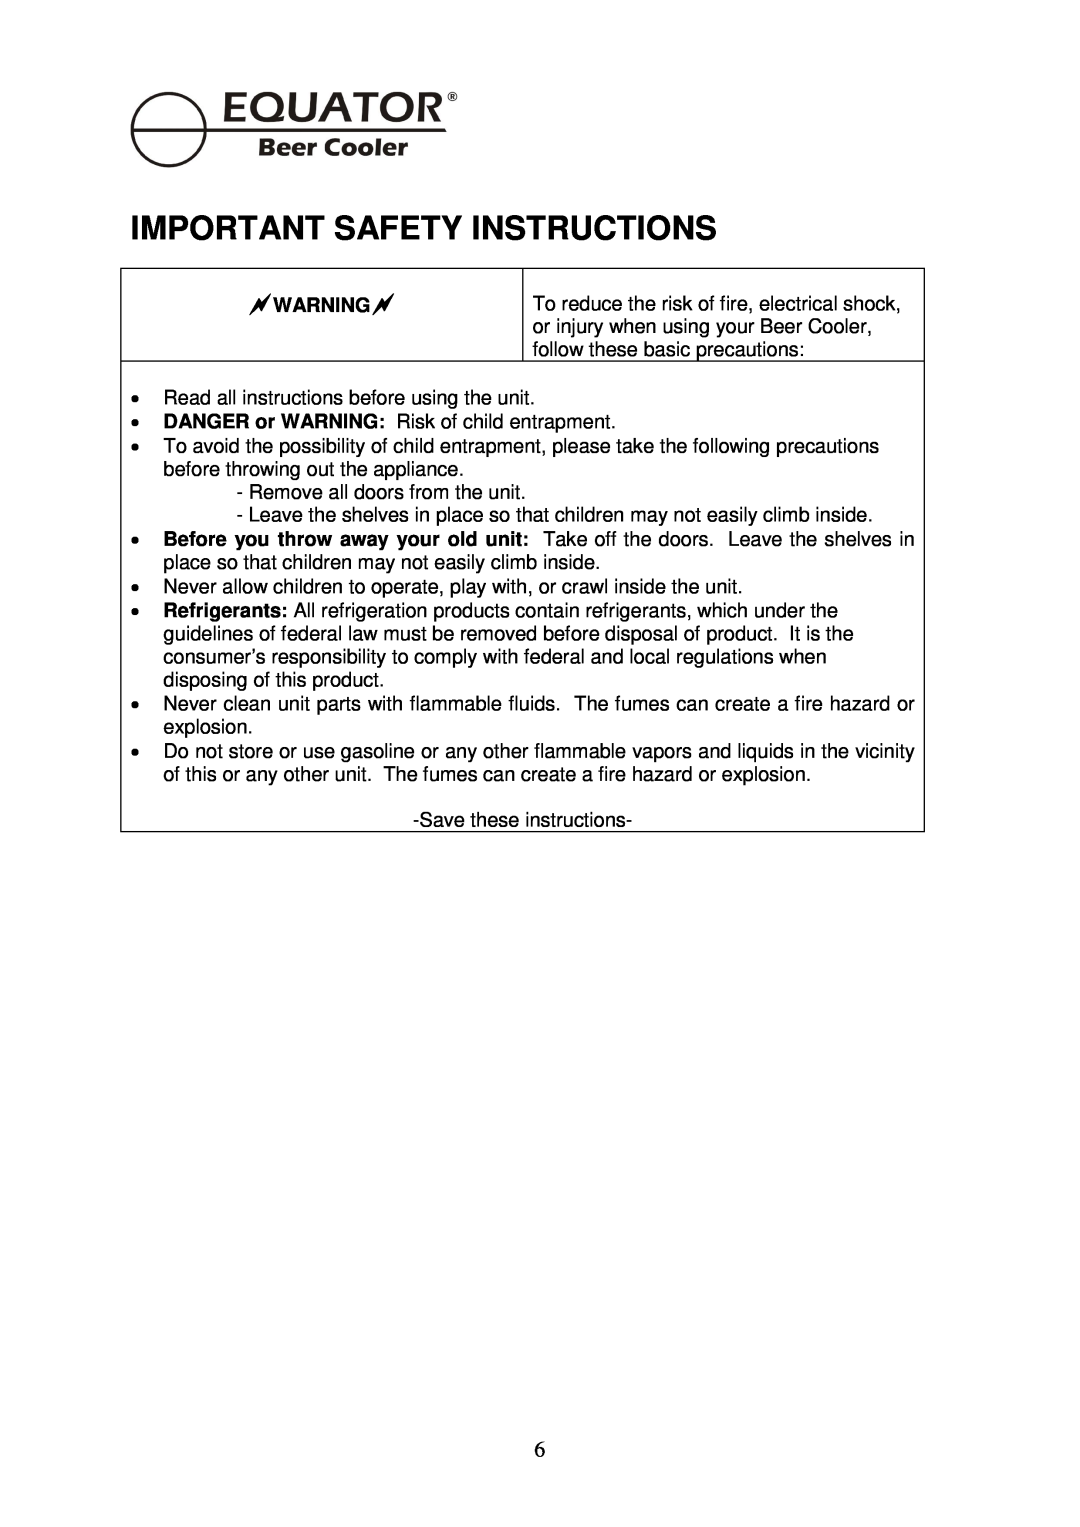 Equator BCR 500 manual Important Safety Instructions, ~Warning~ 